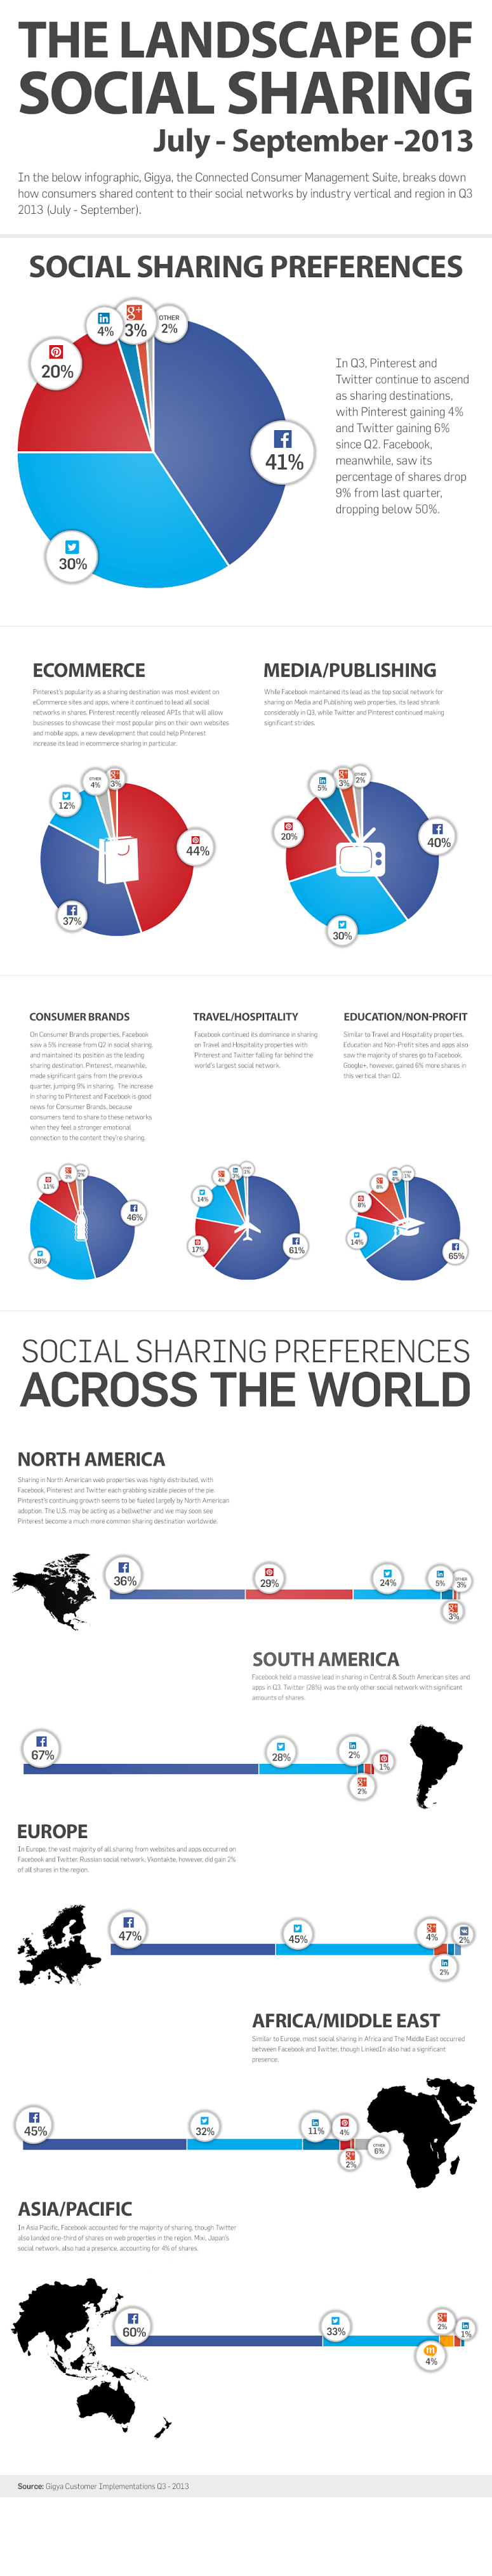 The Landscape of Social Sharing